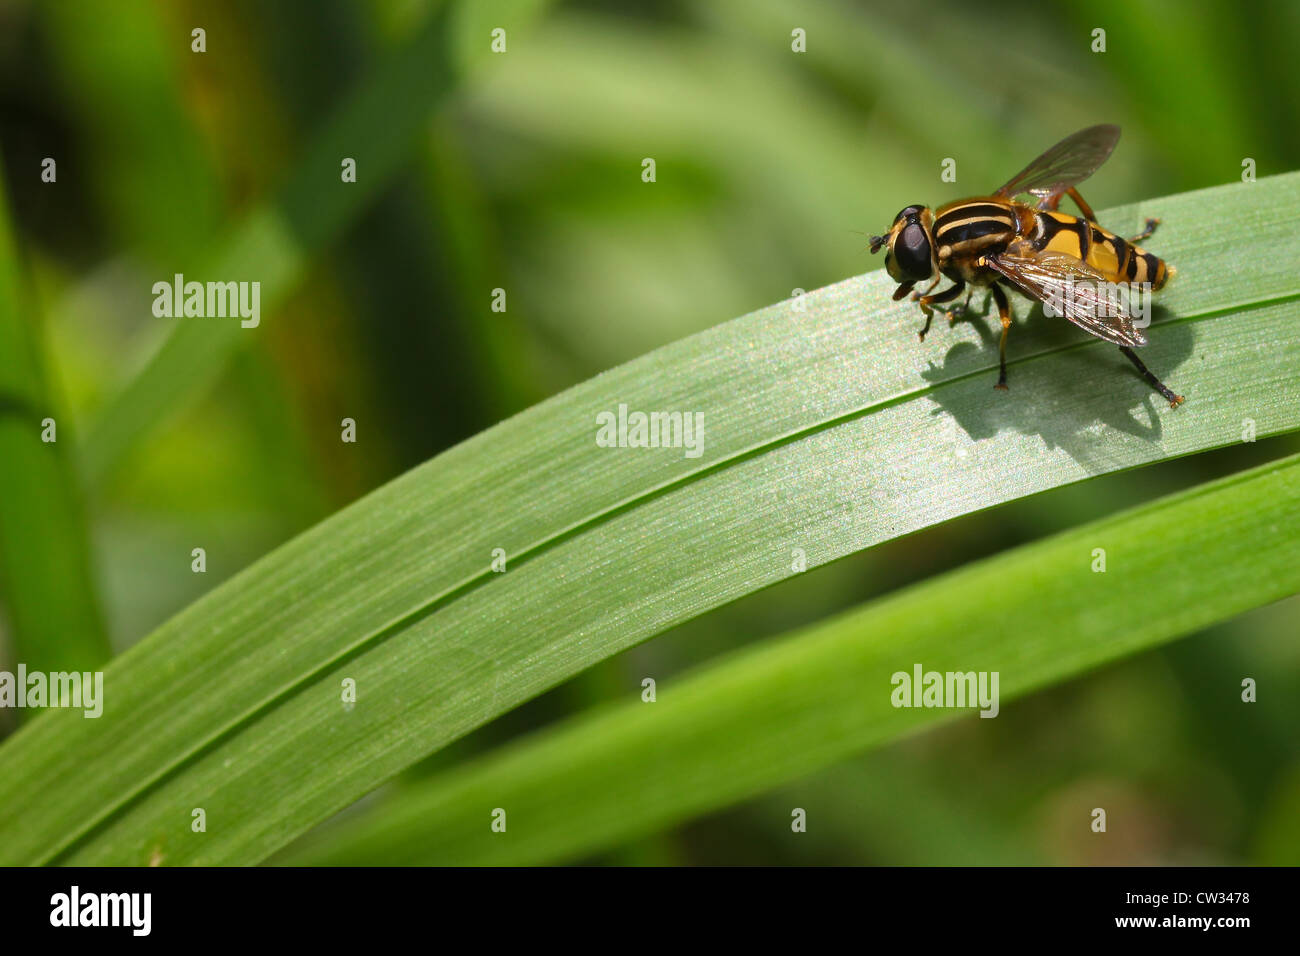 Hoverfly sitting on grass, le mimétisme chez les insectes hover fly Banque D'Images